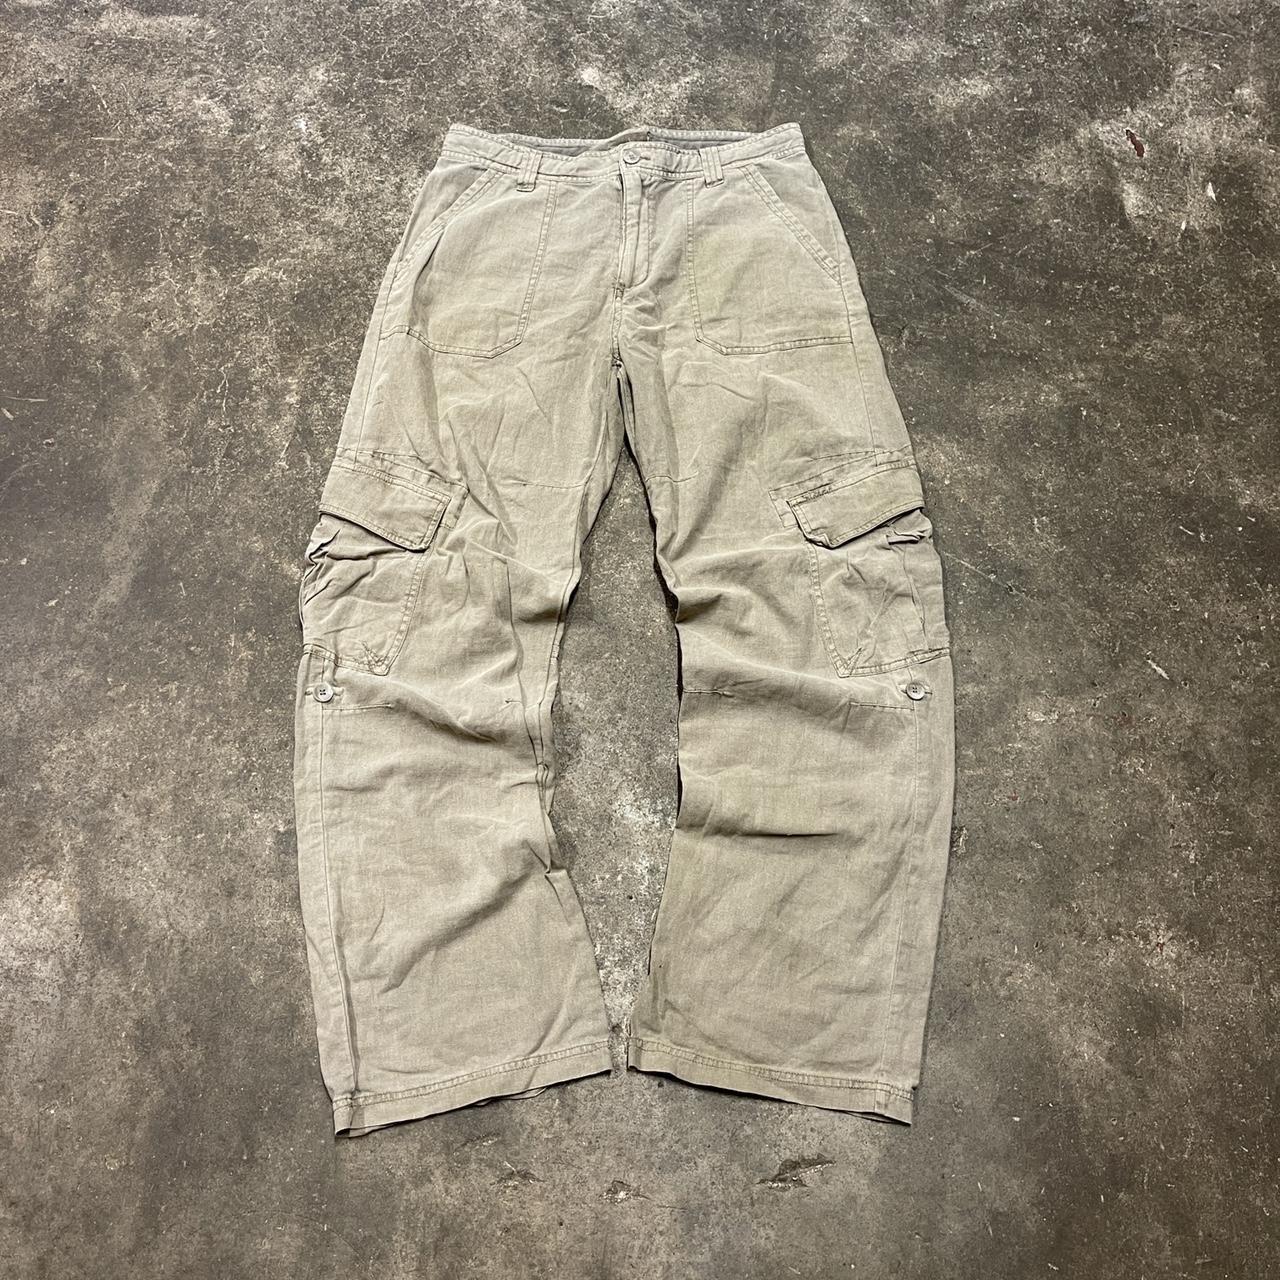 Urban Outfitters Men's Cream and Tan Trousers | Depop